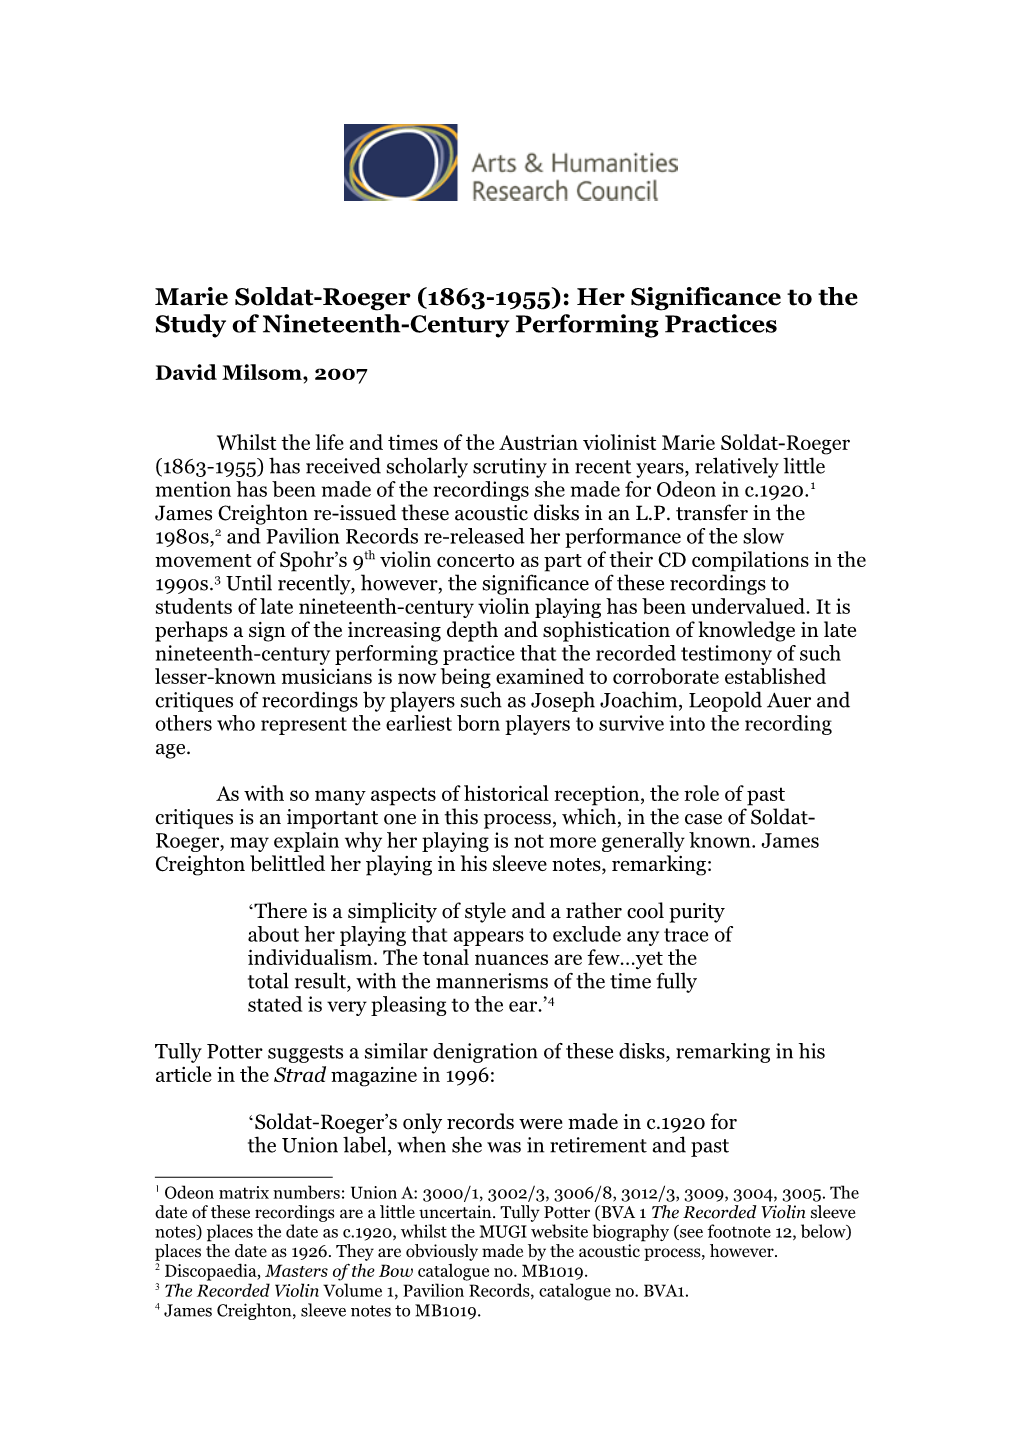 Whilst the Life and Times of the Austrian Violinist Marie Soldat-Roeger (1863-1955) Has